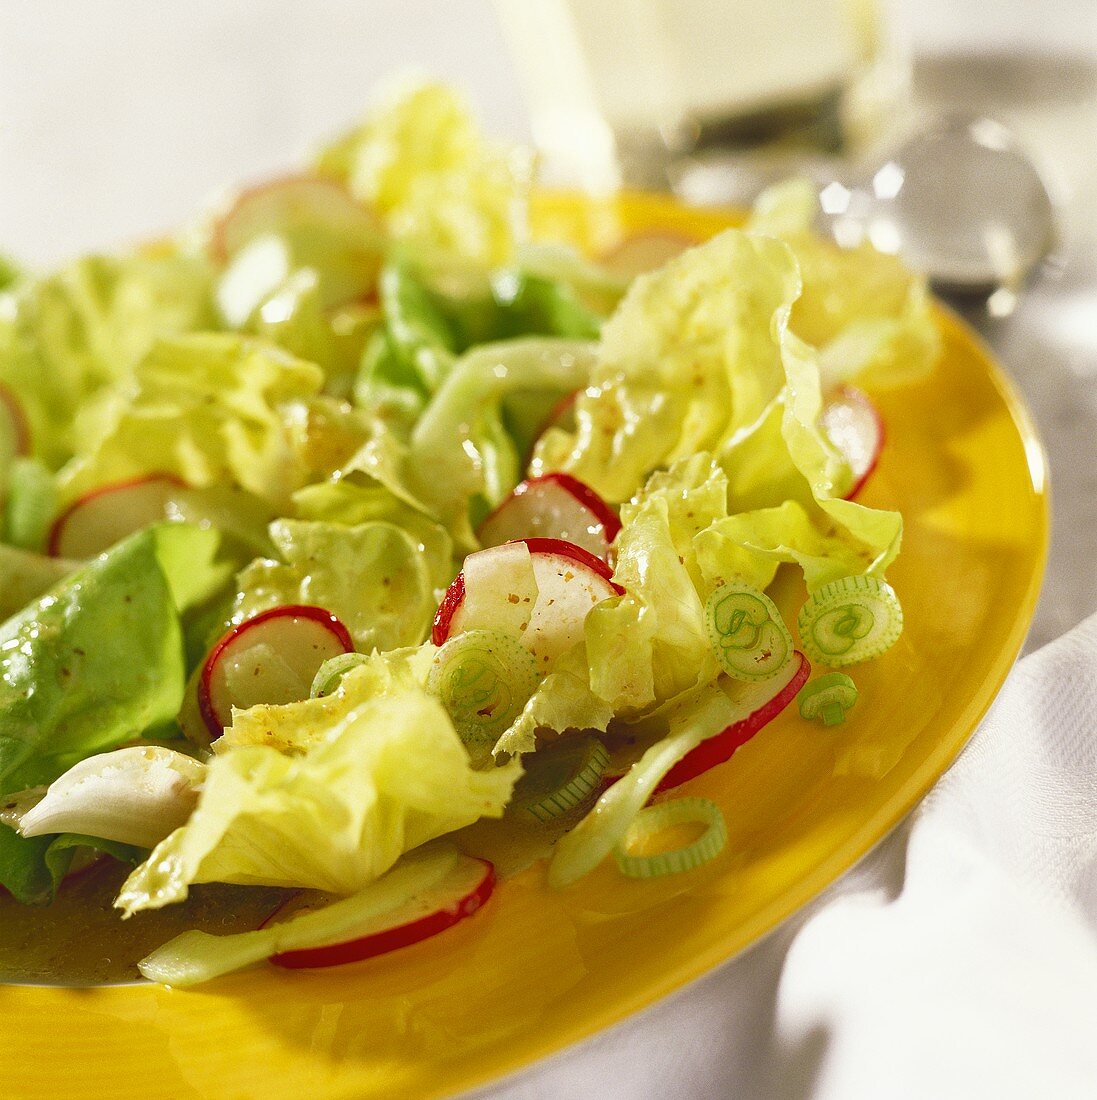 Lettuce with mustard vinaigrette, radishes on a yellow plate